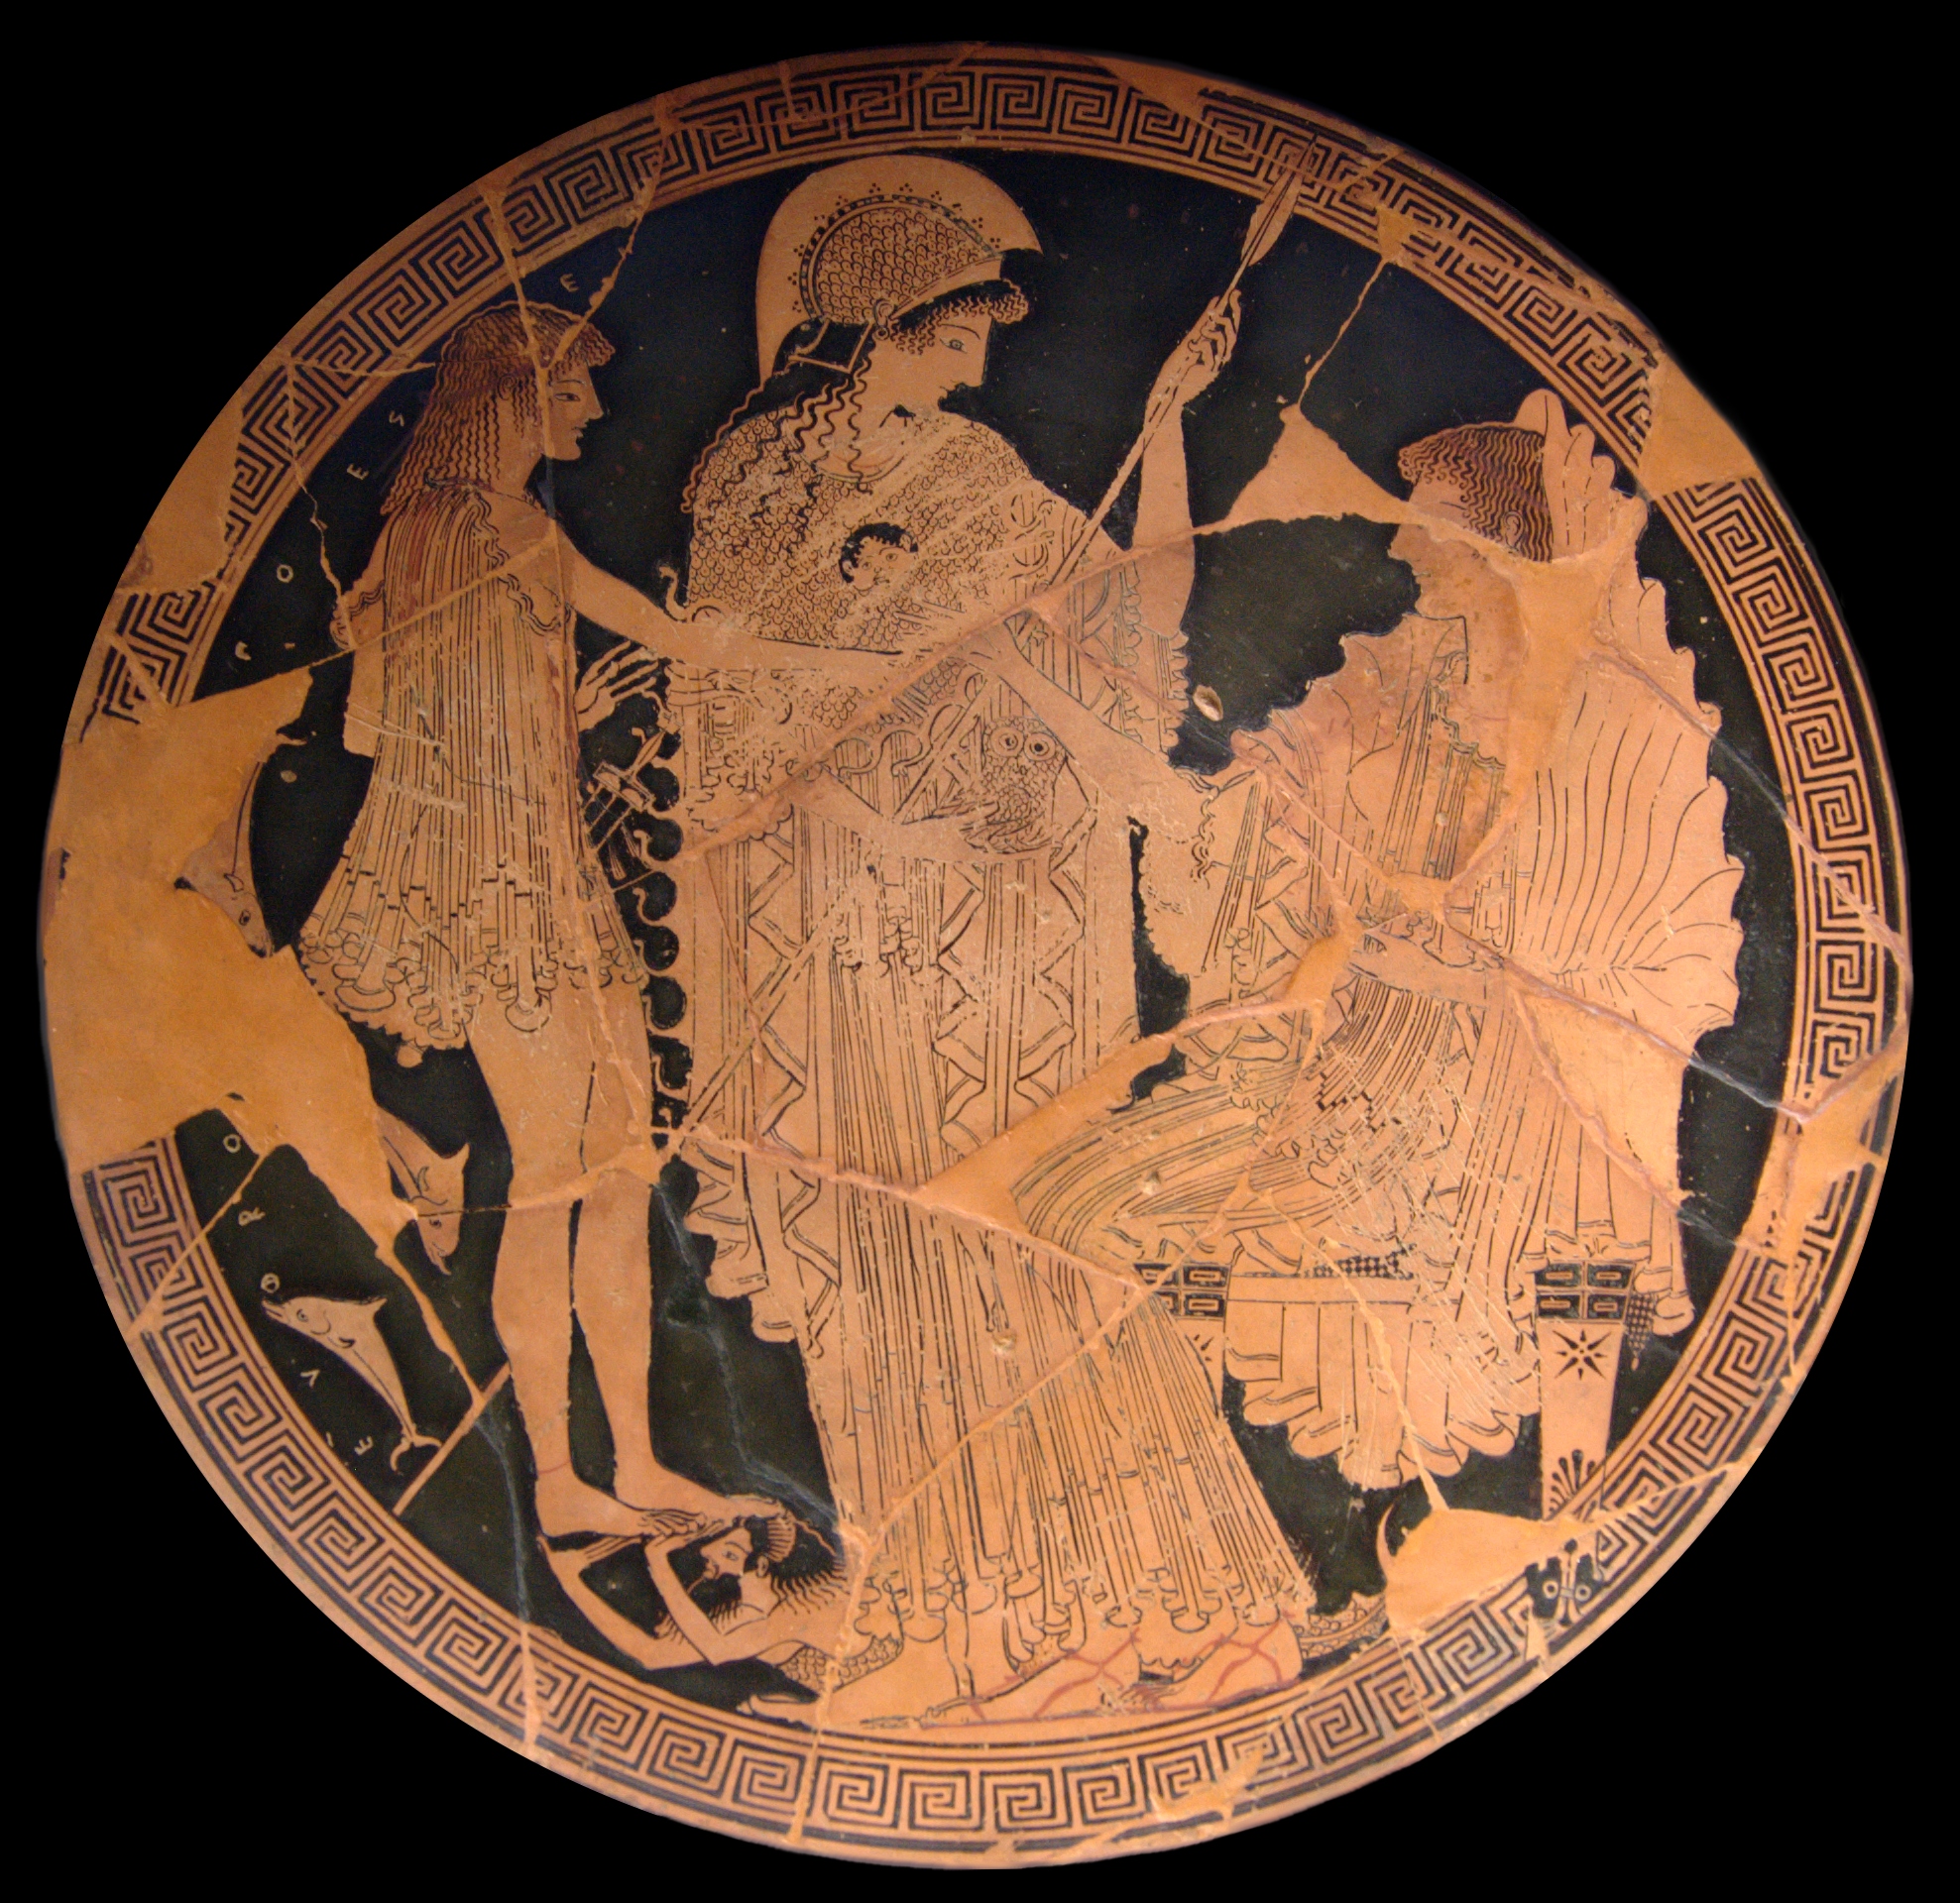 Athena, in embroidered robes and a helm, watches over Theseus and Amphitrite. Athena holds a spear in one hand and an owl in the other.